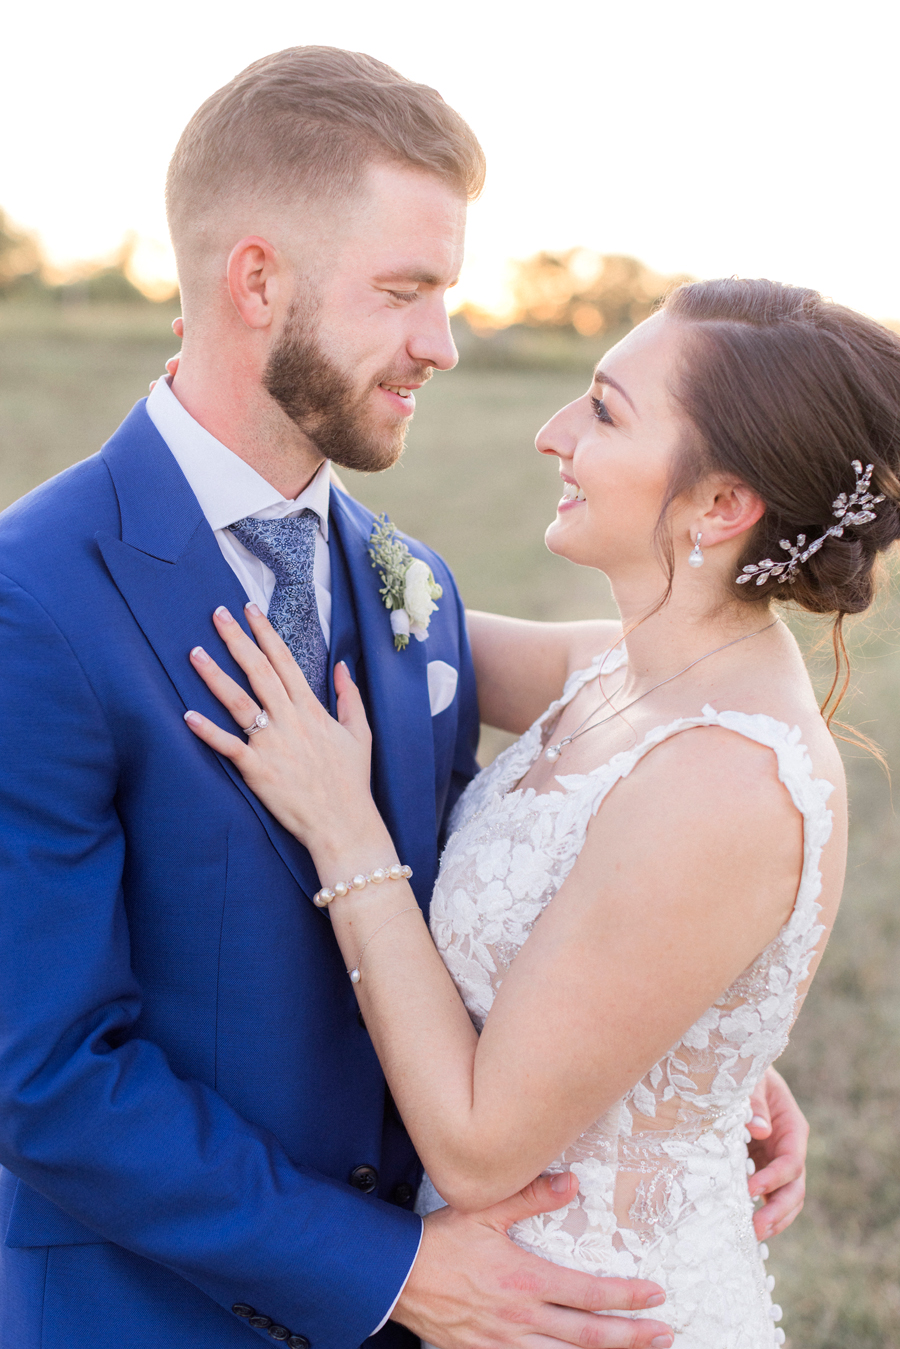 Sunset photos with the bride and groom at their Blue Bell Farm wedding by Missouri wedding photographer Love Tree Studios.